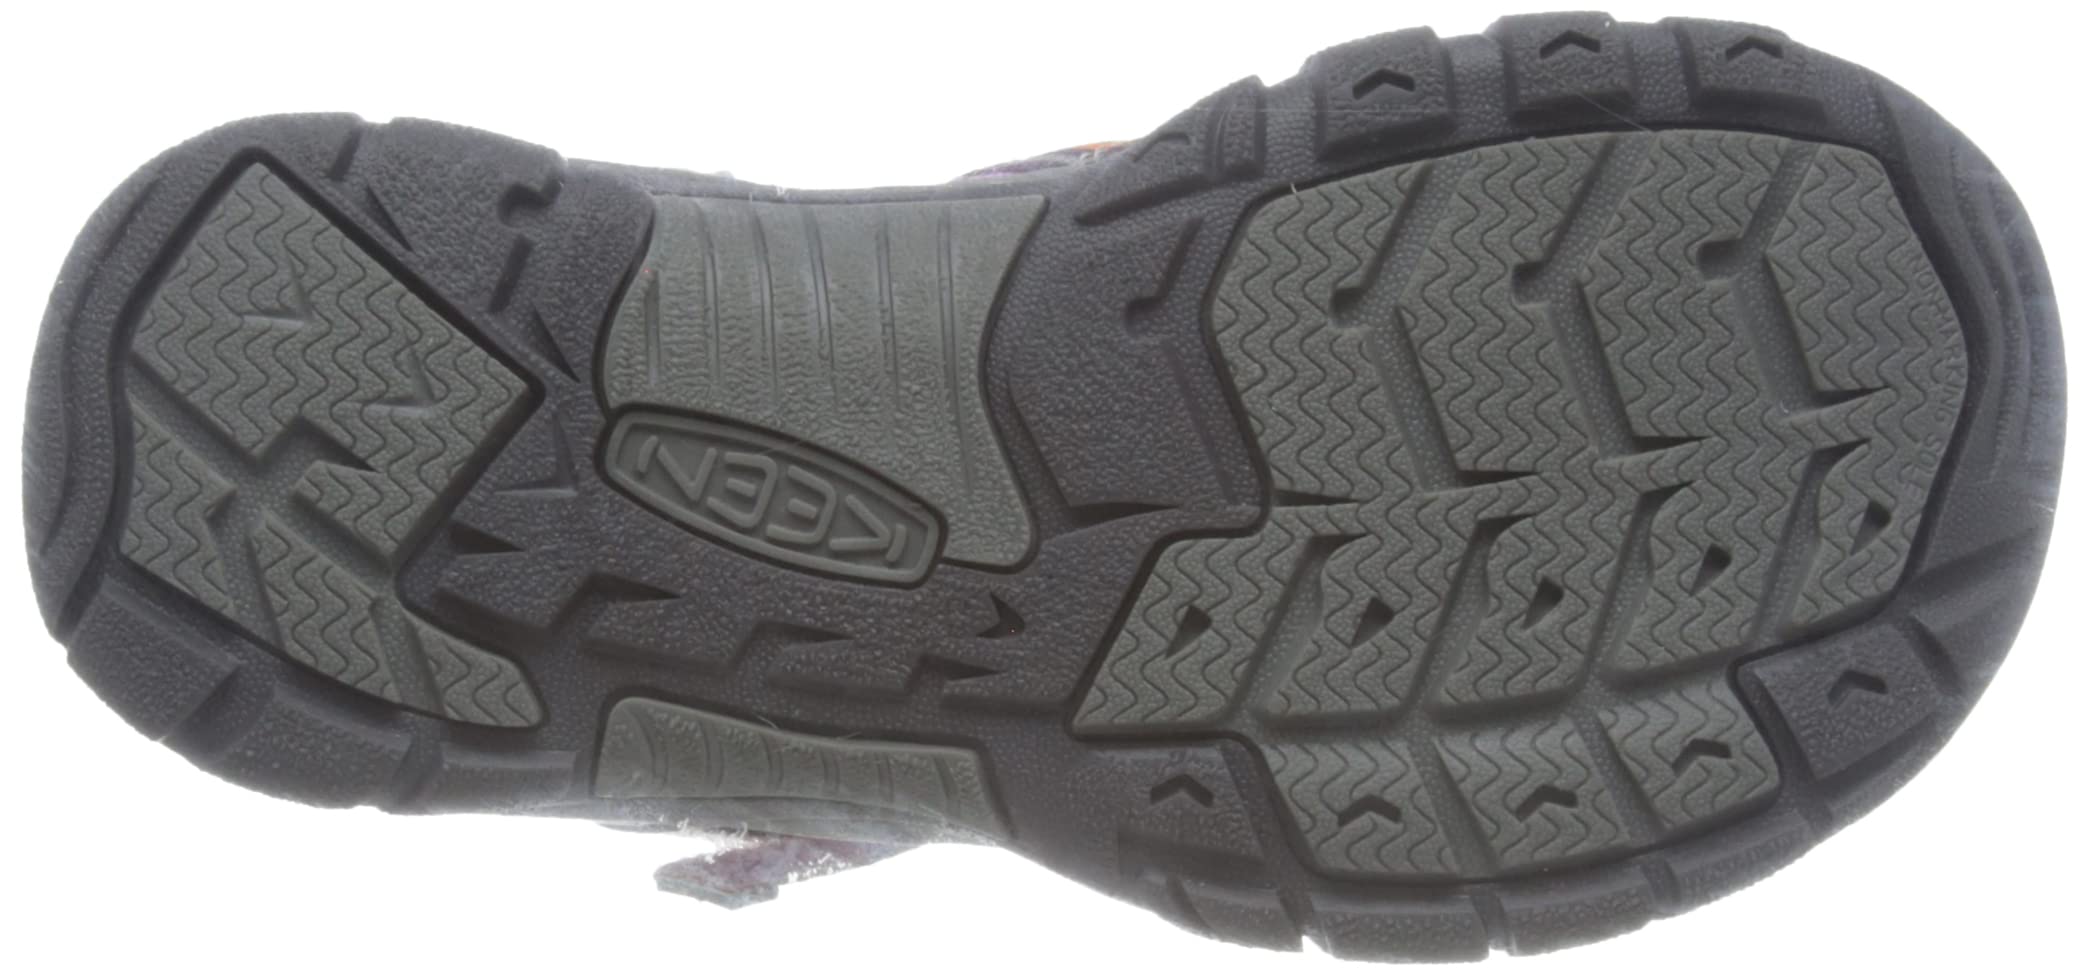 KEEN Unisex-Child Venice H2 Closed Toe Water Sandals